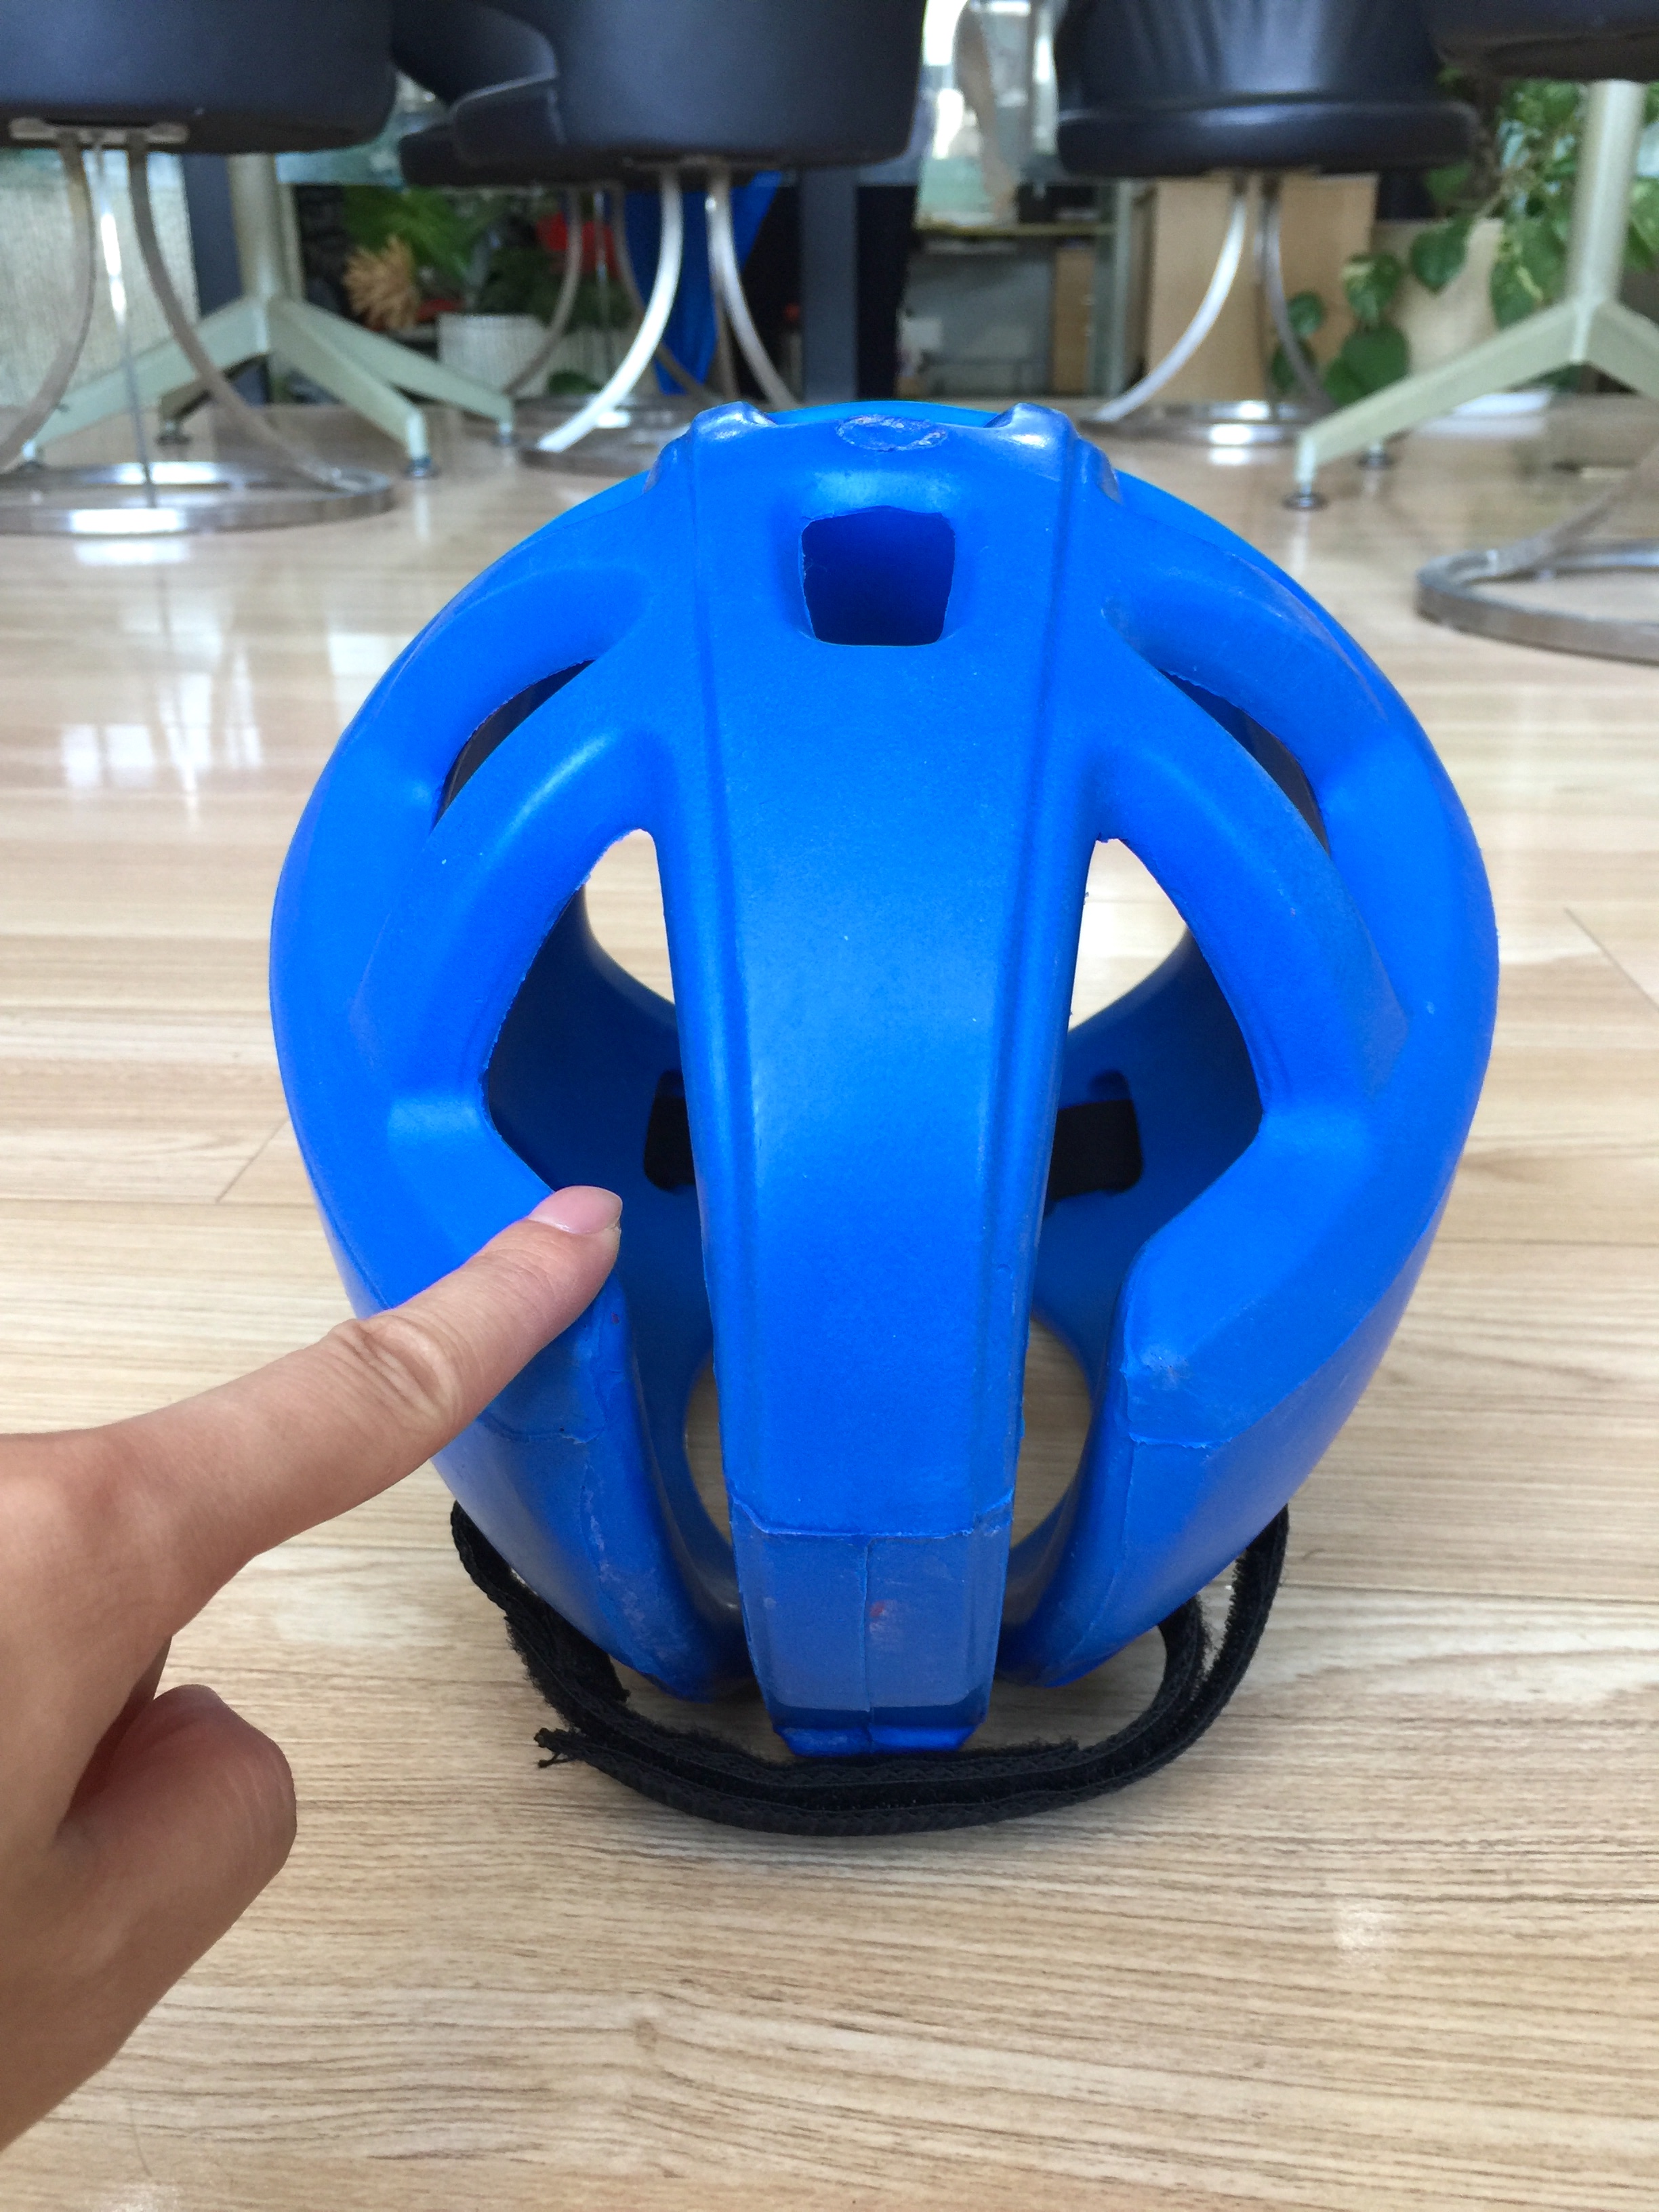 Bulk order polyurethane comfortable and beautiful helmet for outdoor sports